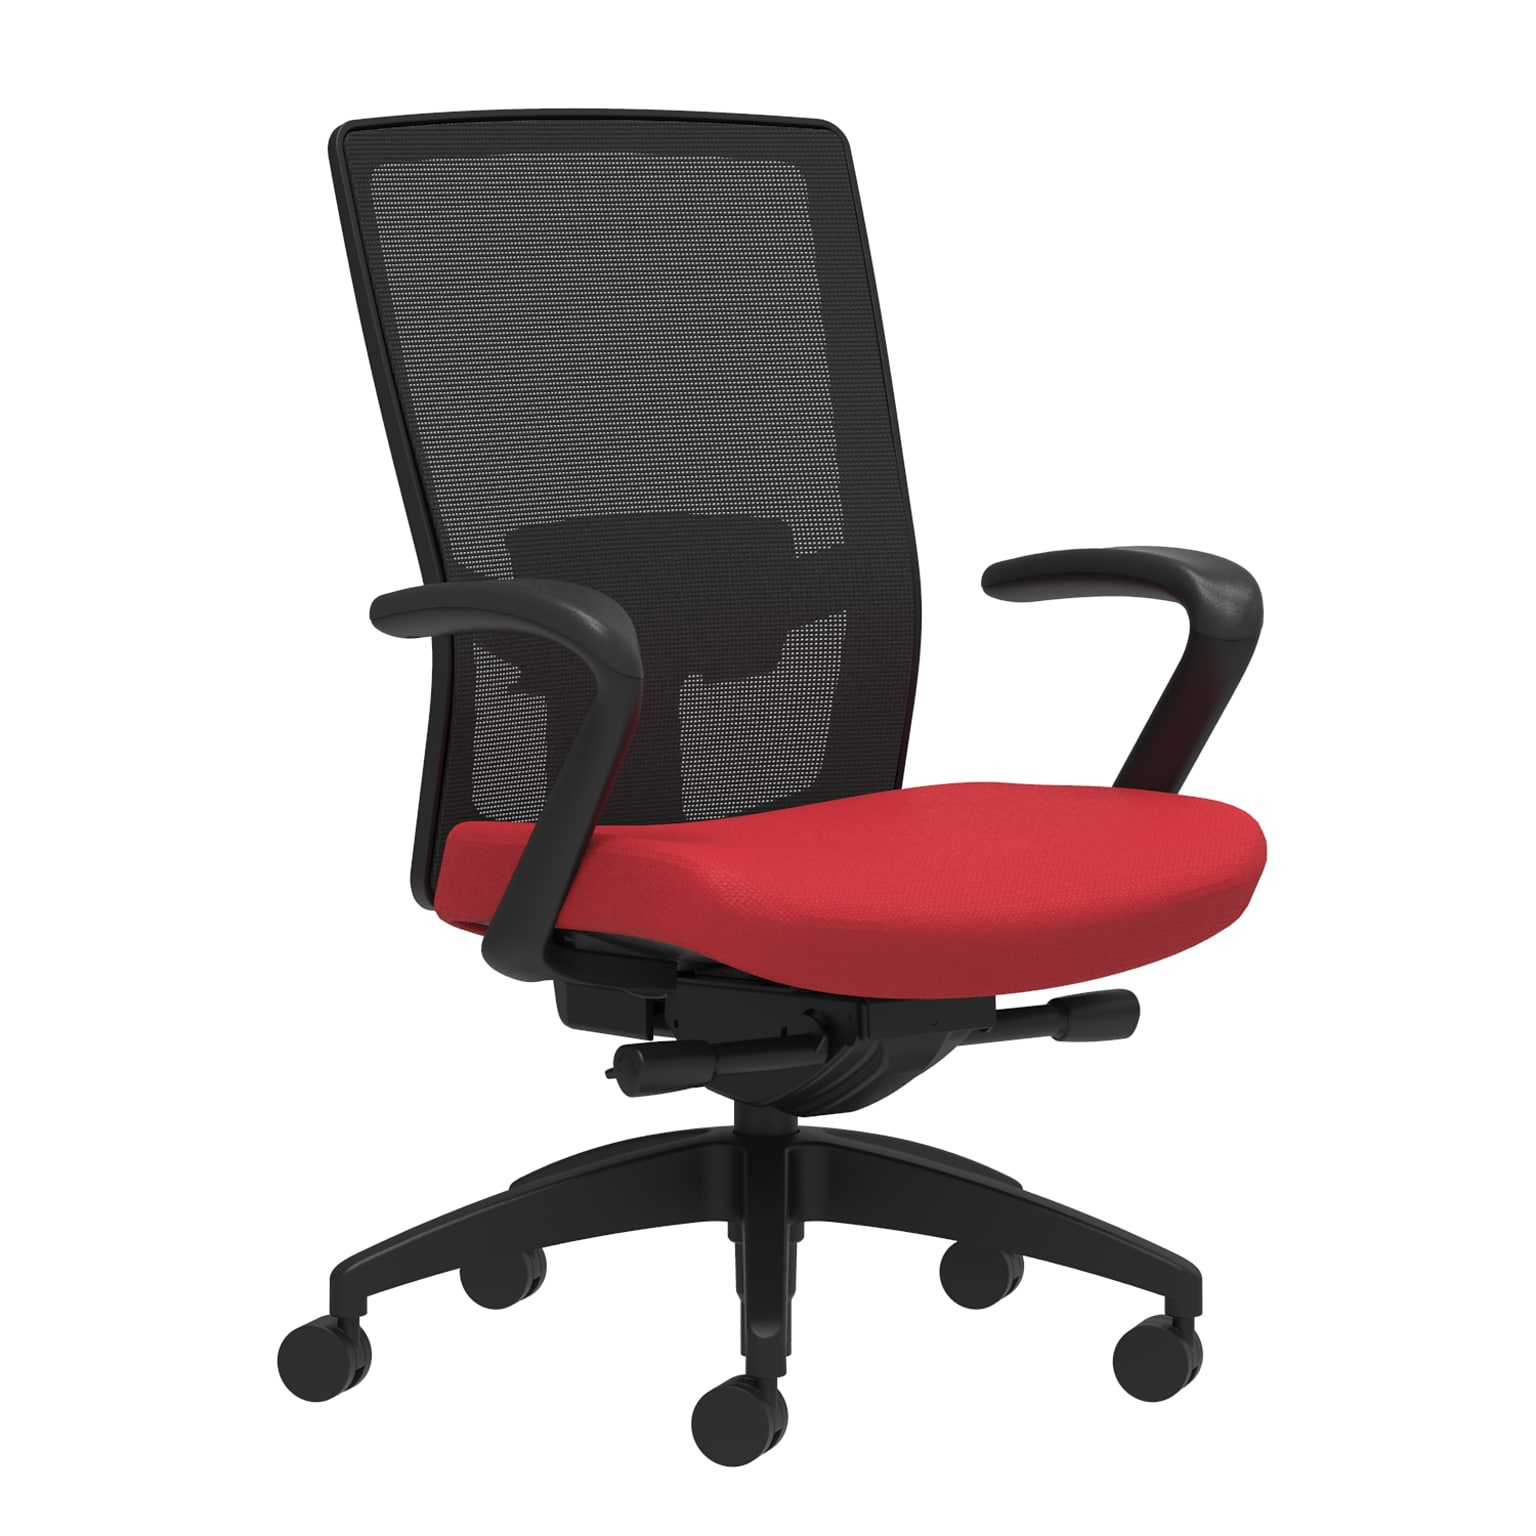 Union & Scale Workplace2.0™ Fabric Task Chair, Cherry, Adjustable Lumbar, Fixed Arms, Advanced Synchro-Tilt Seat Control (53663)